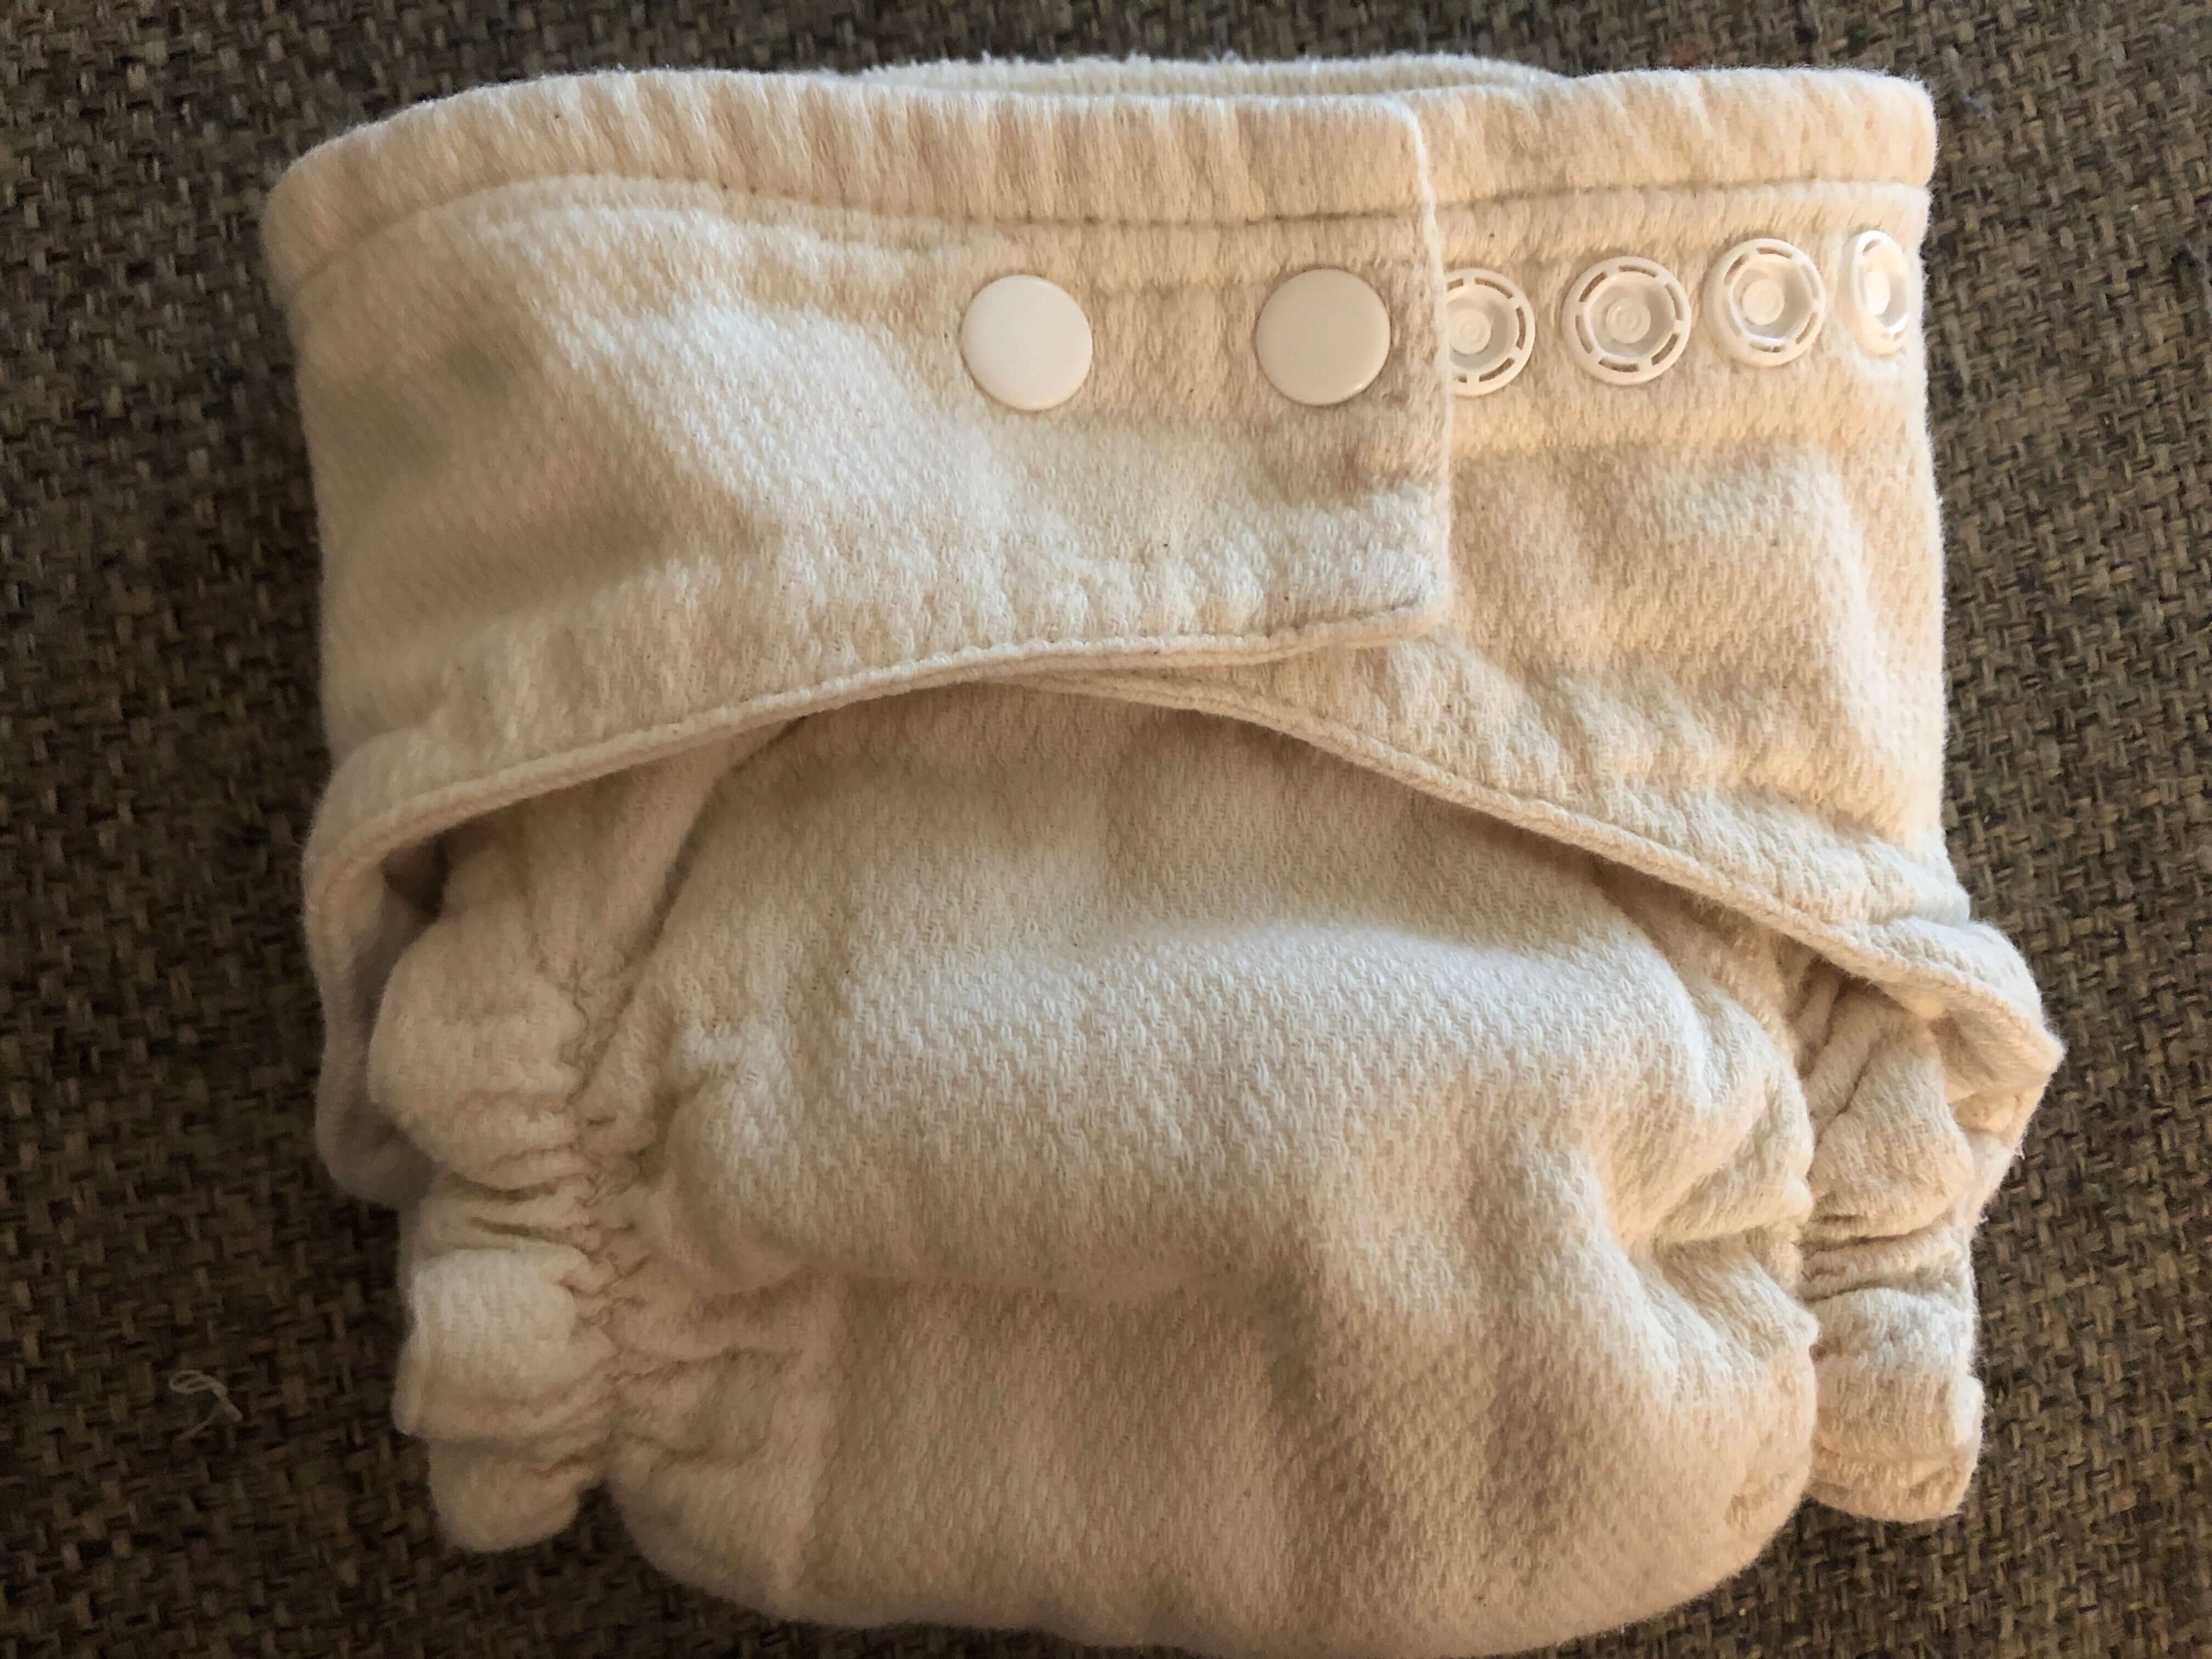 Cloth Diaper Service, Dallas, Fort Worth, Milwaukee, Wisconsin, Texas, Wholesome Diaper Co. Healthy, Eco-friendly, Zero-waste, Diapers